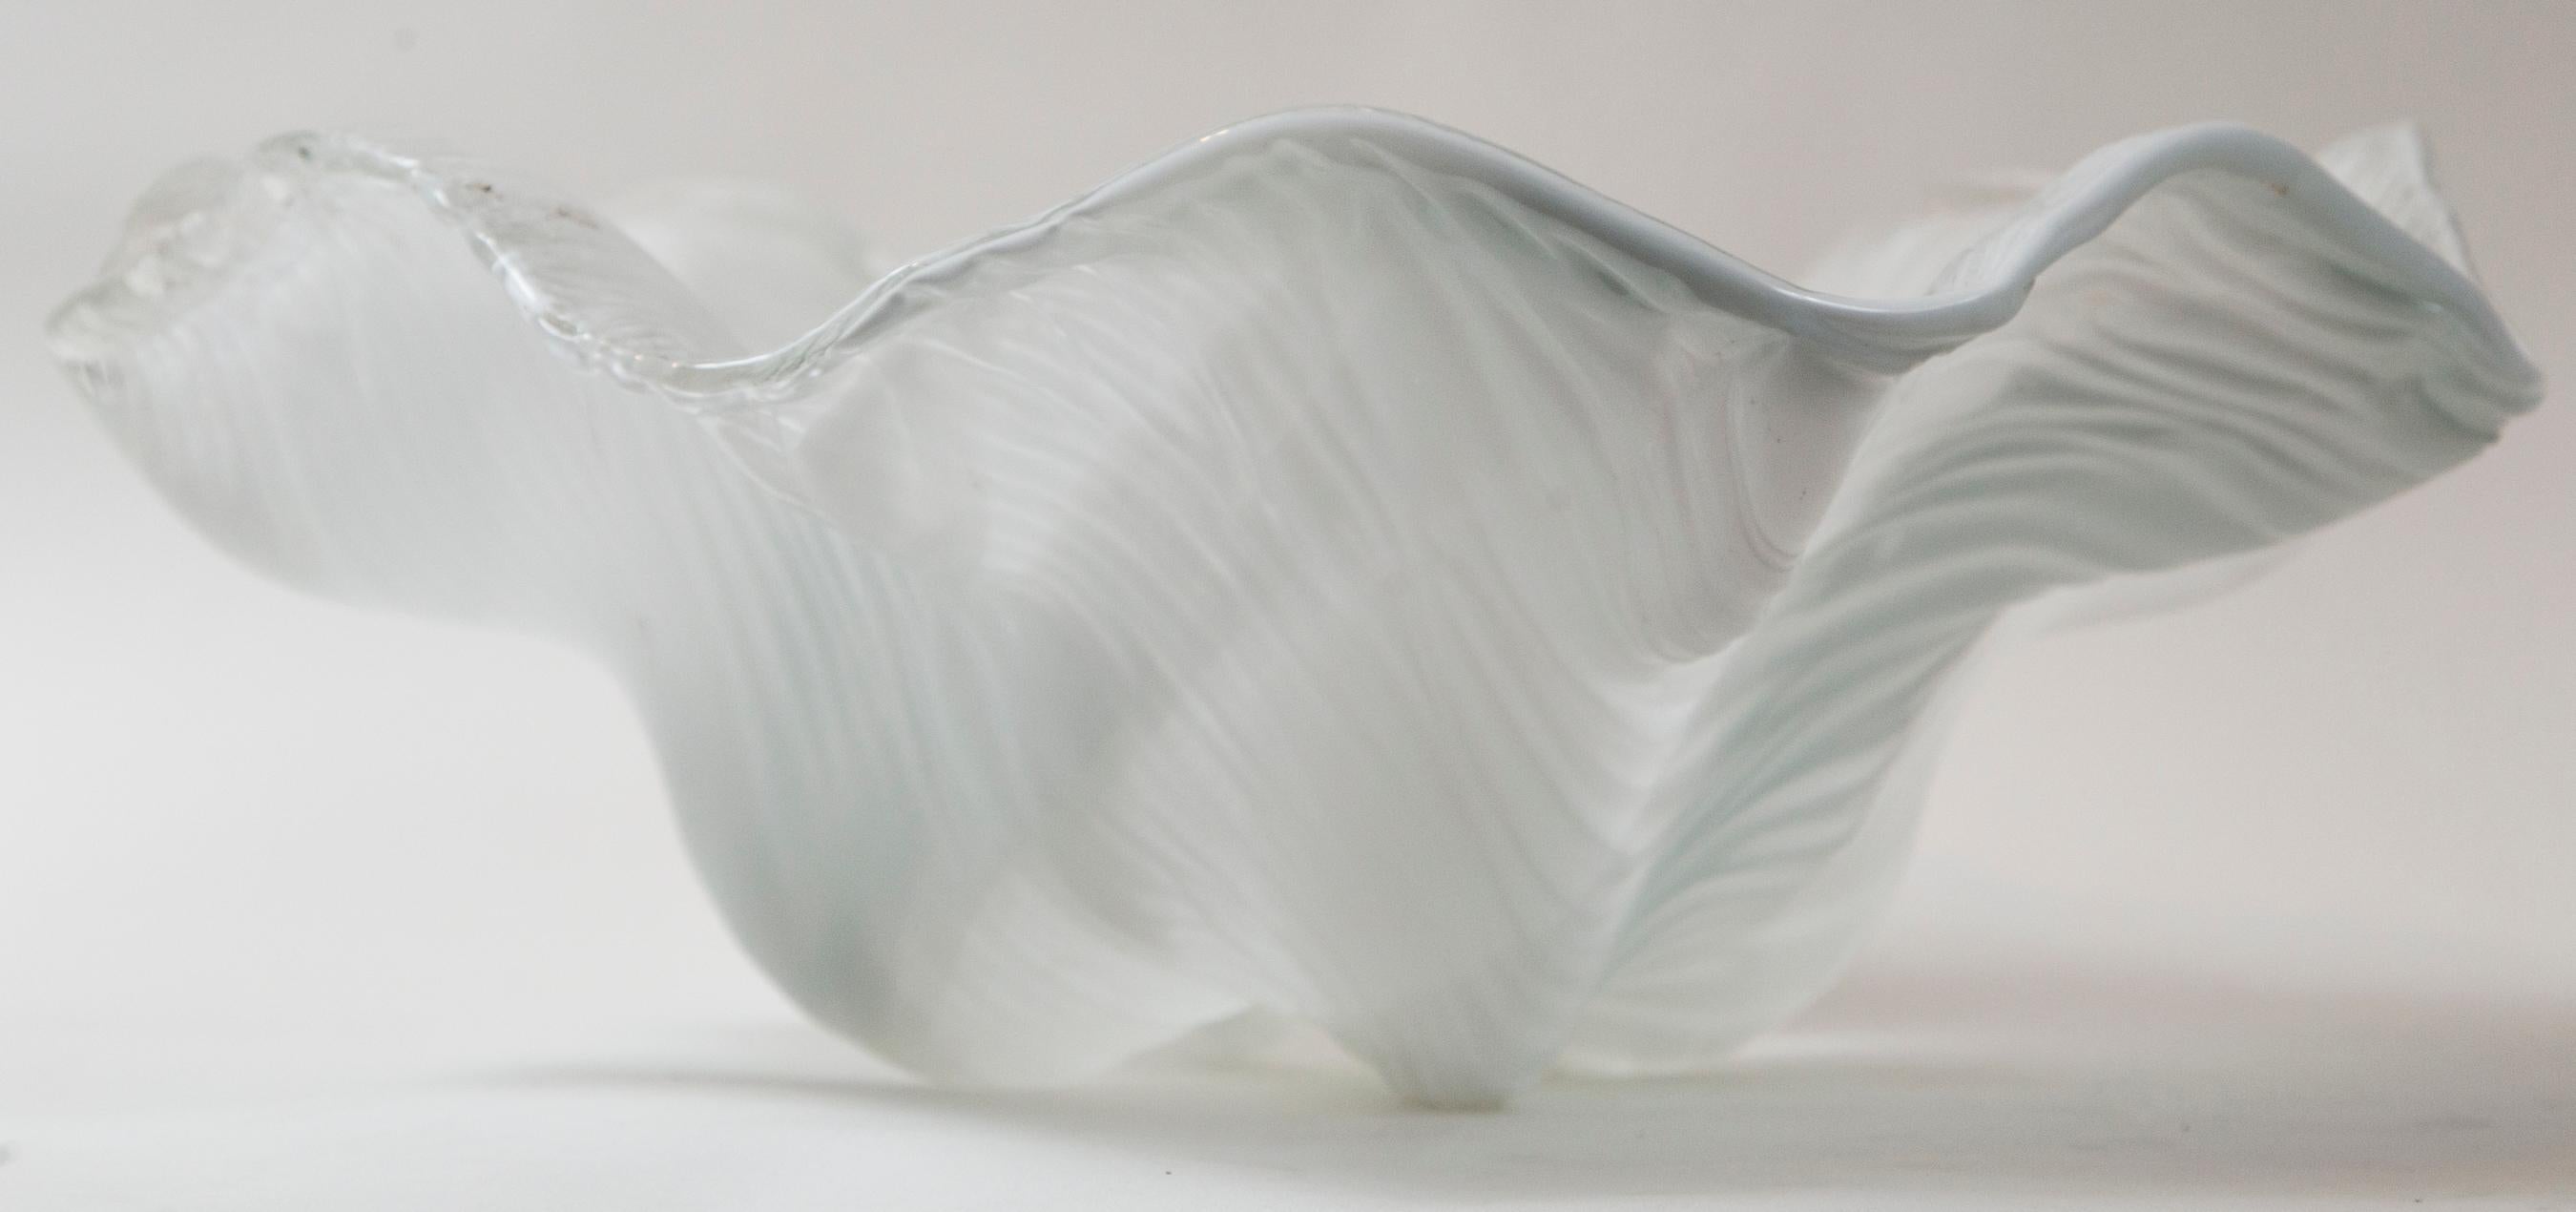 Large centerpiece shell bowl by Toni Zuccheri for Venini, from his Ninfee series
Incised signature to underside: [Venini Italia].
Technique of glass is pasta vitrea which is a colored opaque glass that has the effect of a ceramic.

Date: